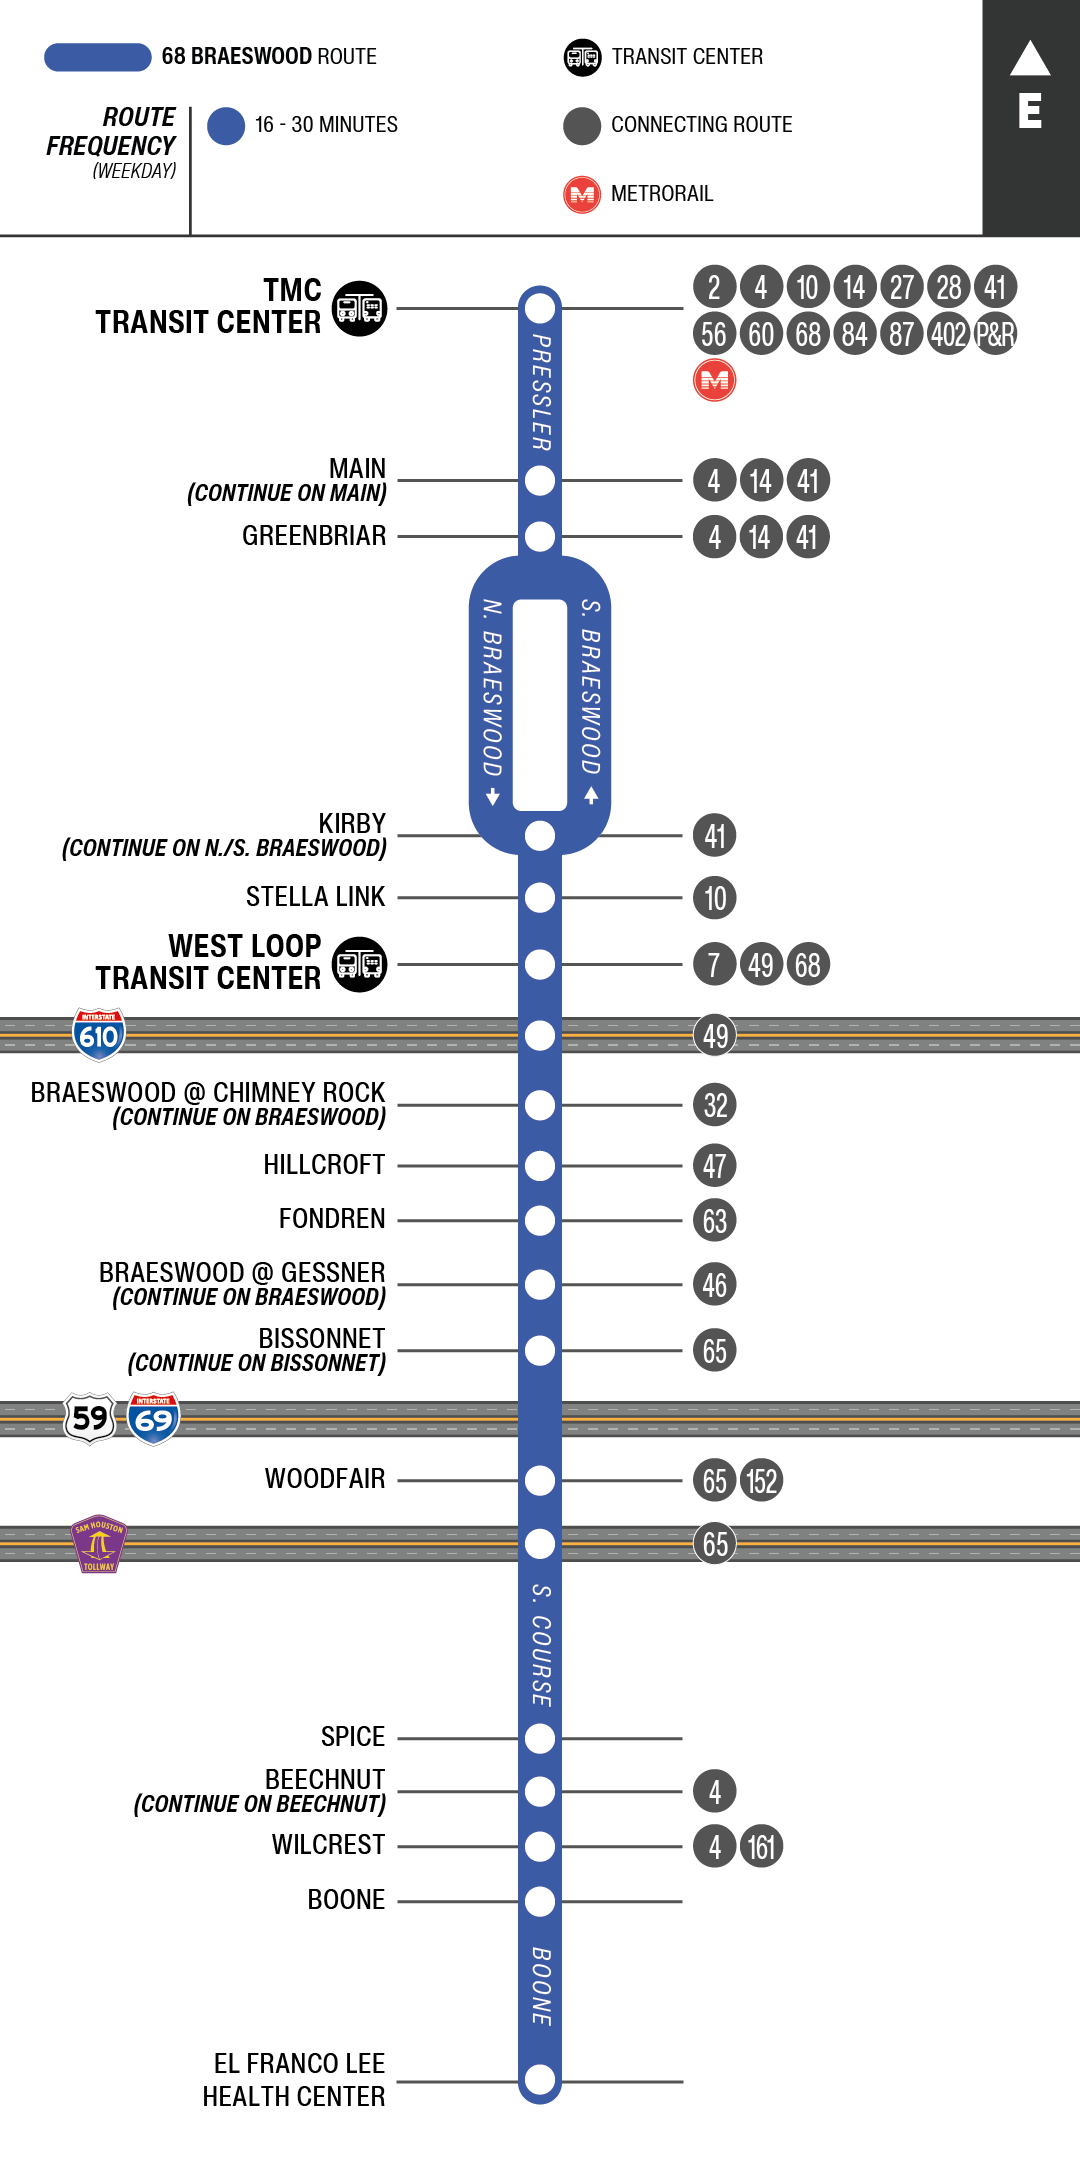 Route map for 68 Braeswood bus